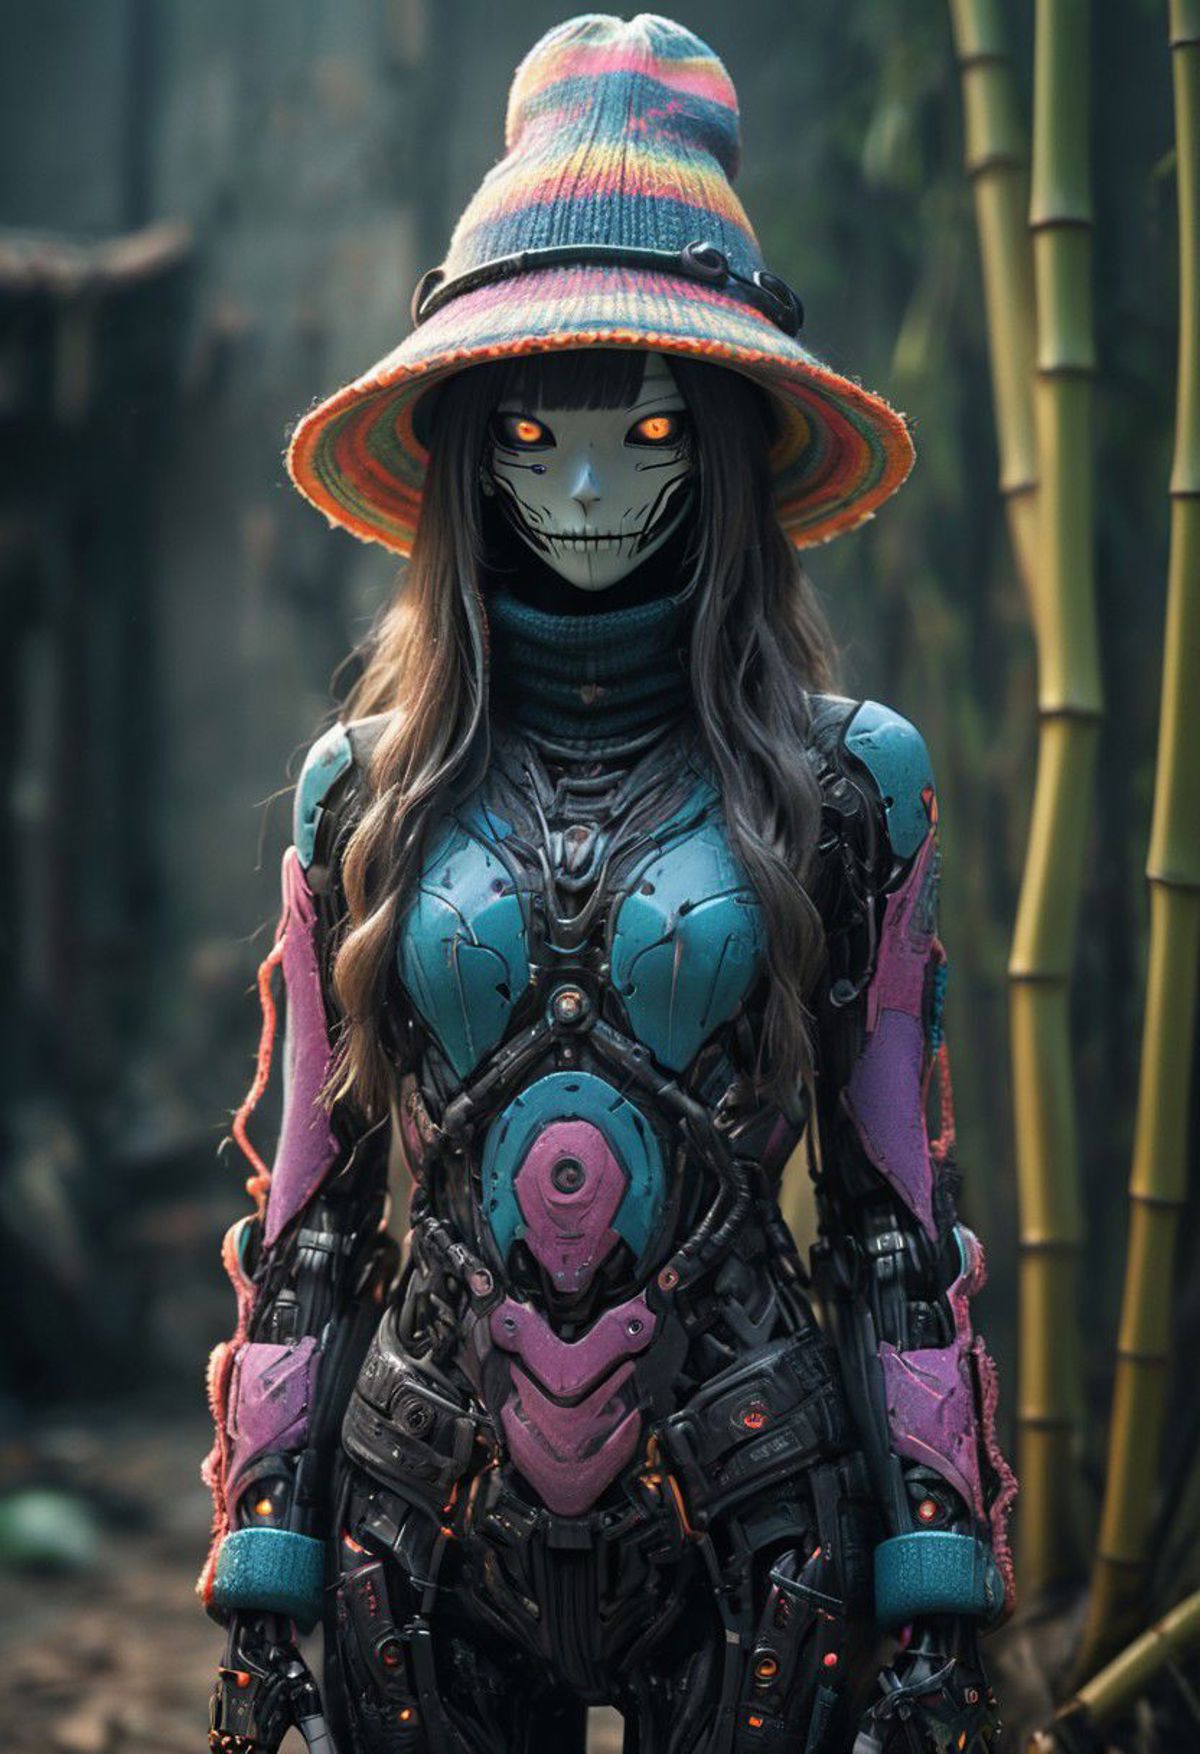 A woman in a blue and purple dress with a face painted like a skeleton.